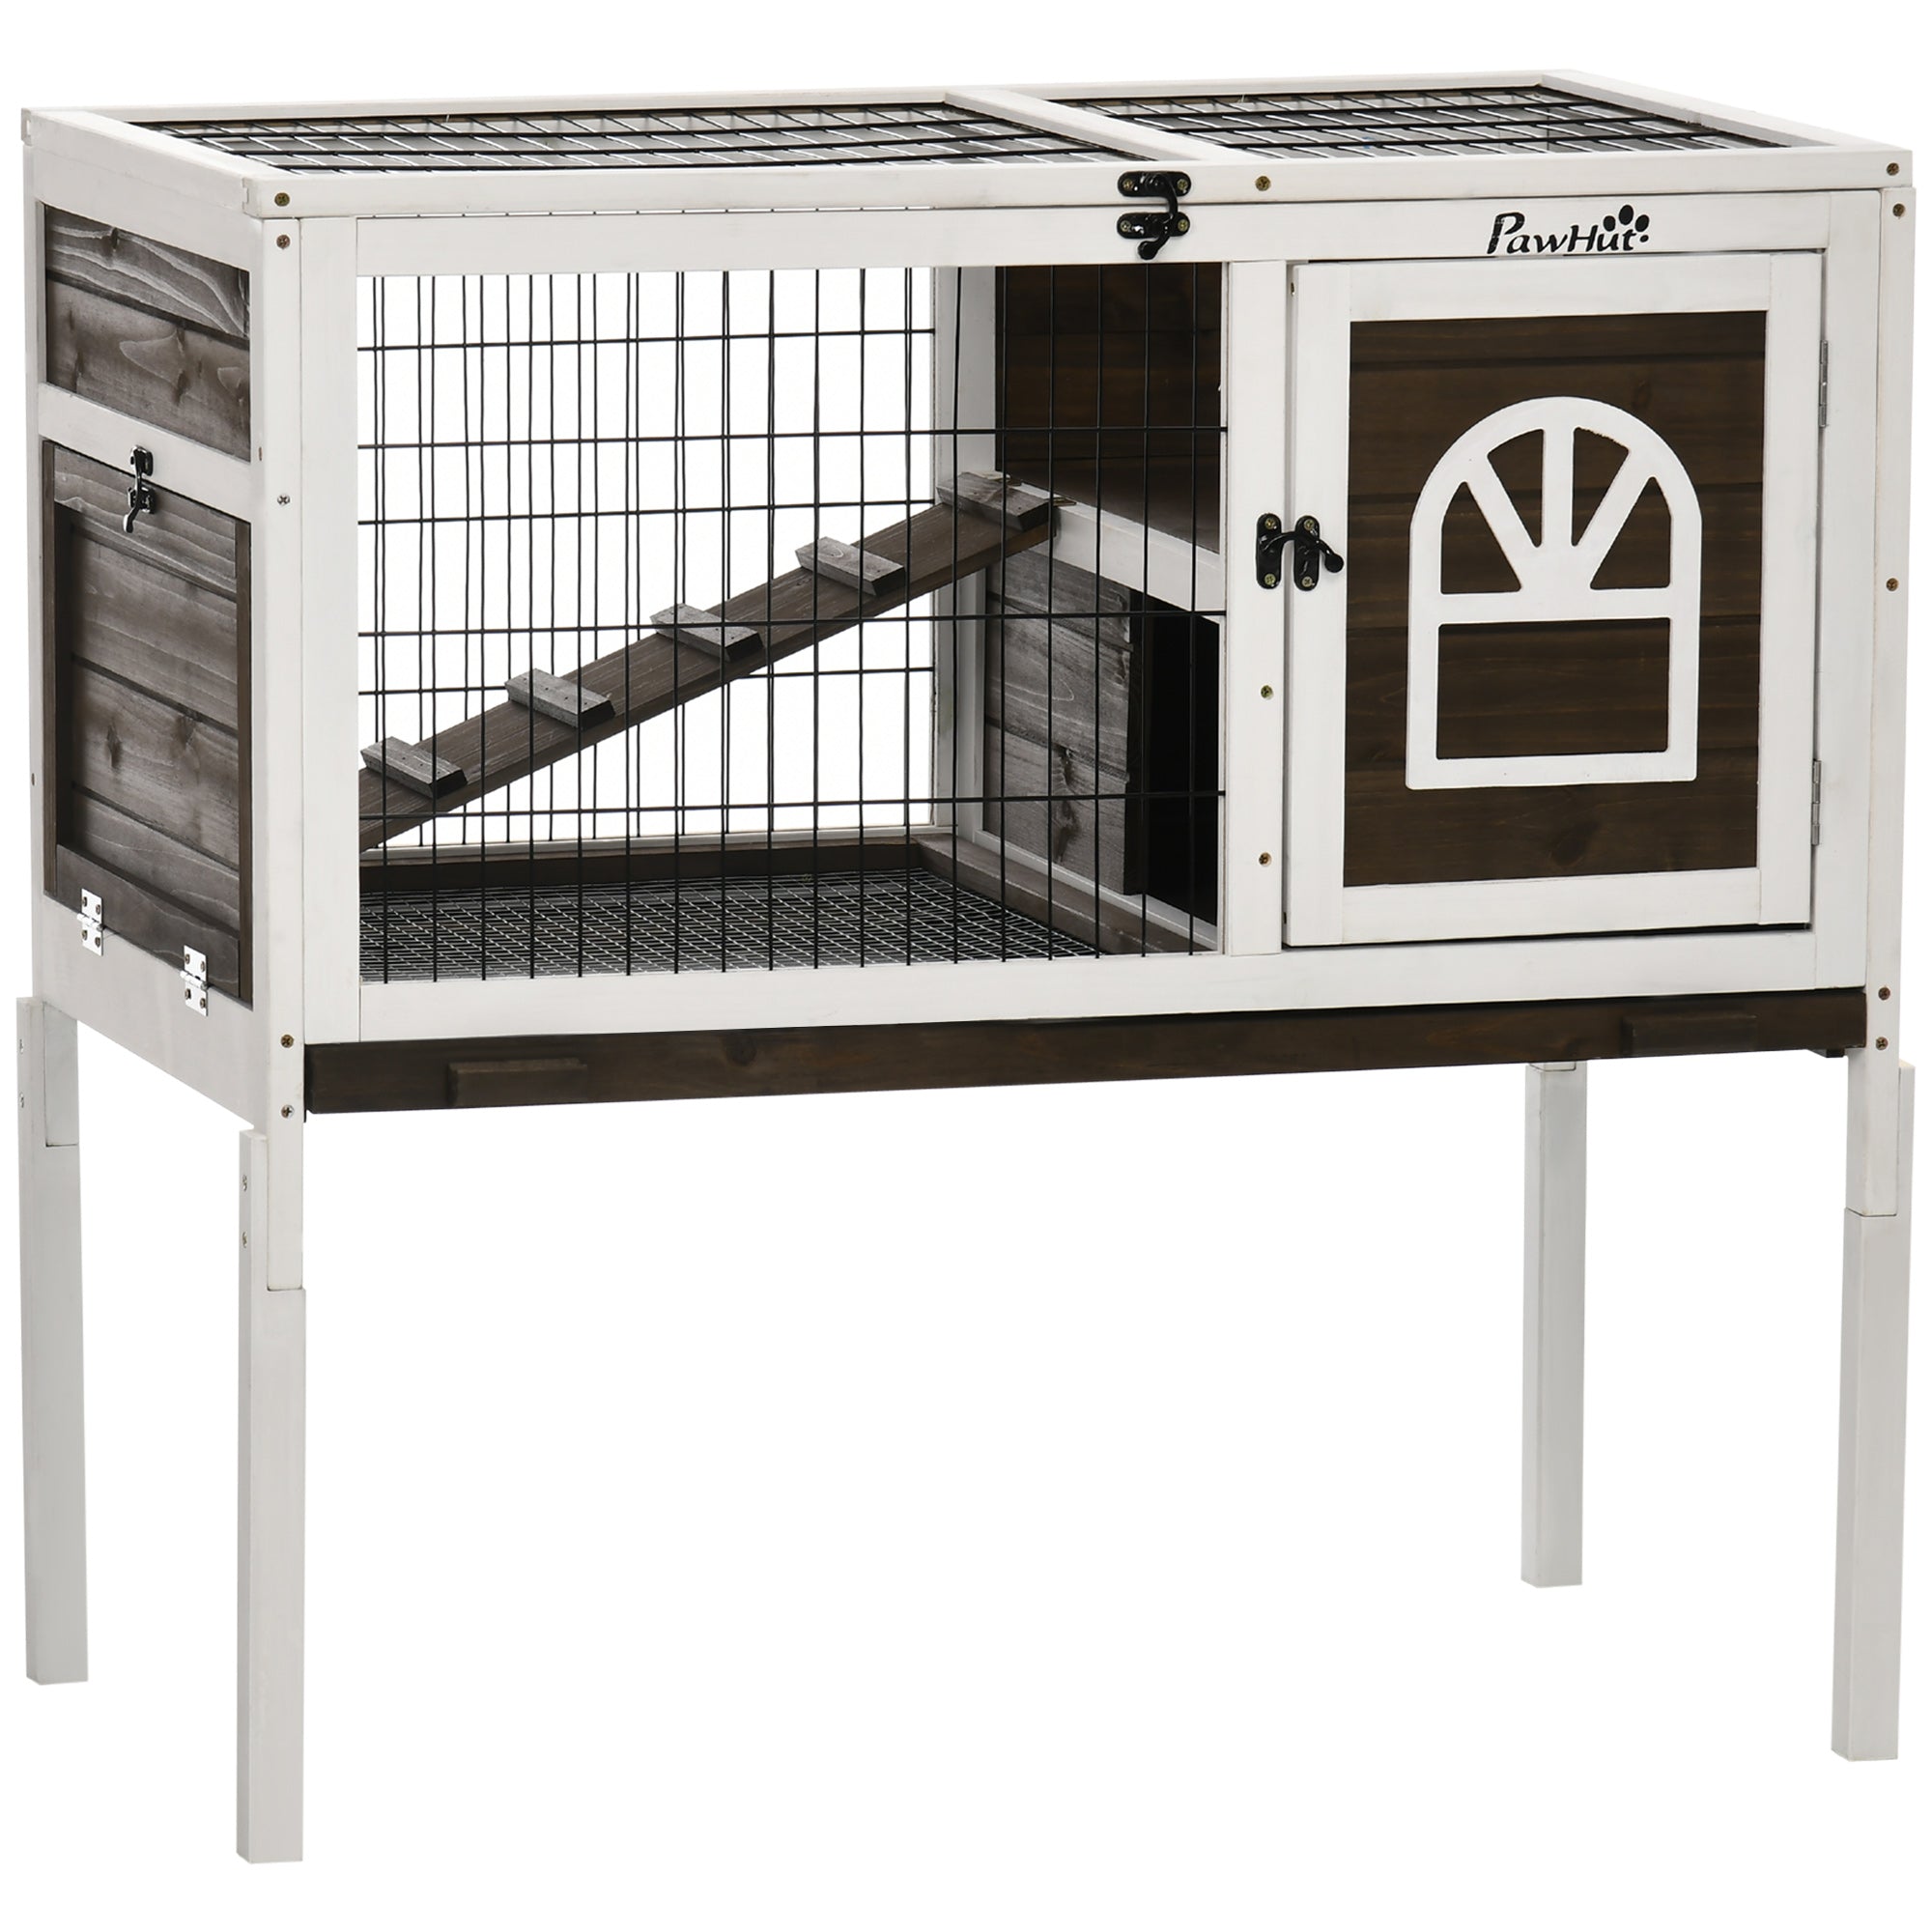 PawHut Wooden Rabbit Hutch - Small Animal House w/ Removable Tray - Openable Roof  | TJ Hughes